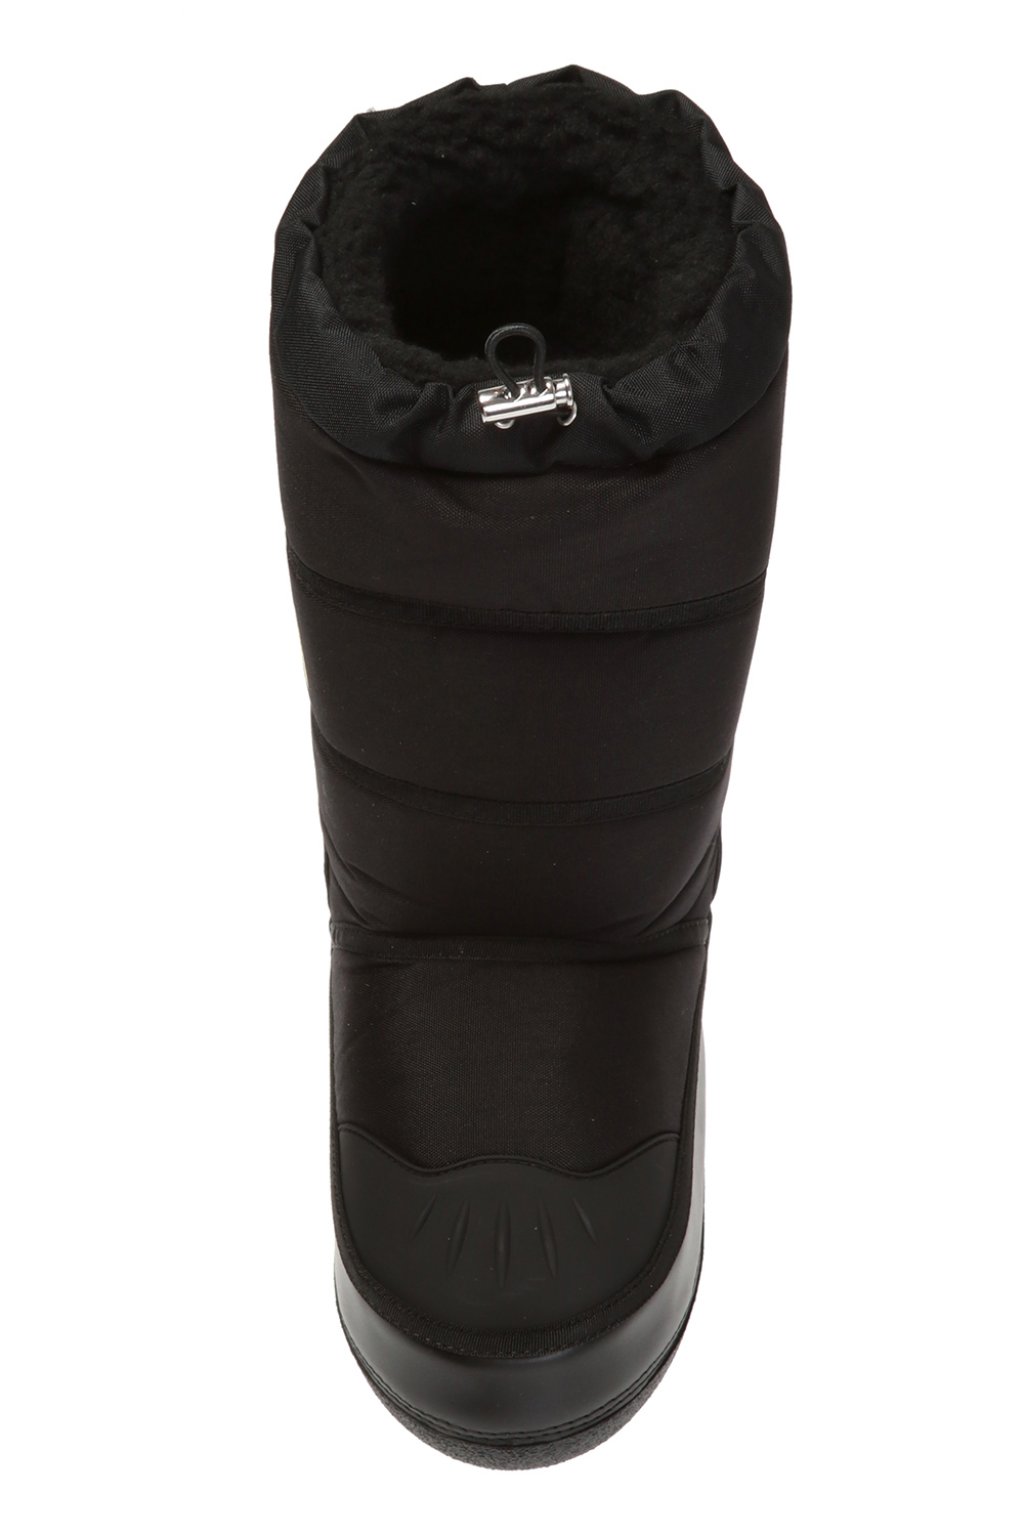 Dsquared2 ‘Icon’ moon boots